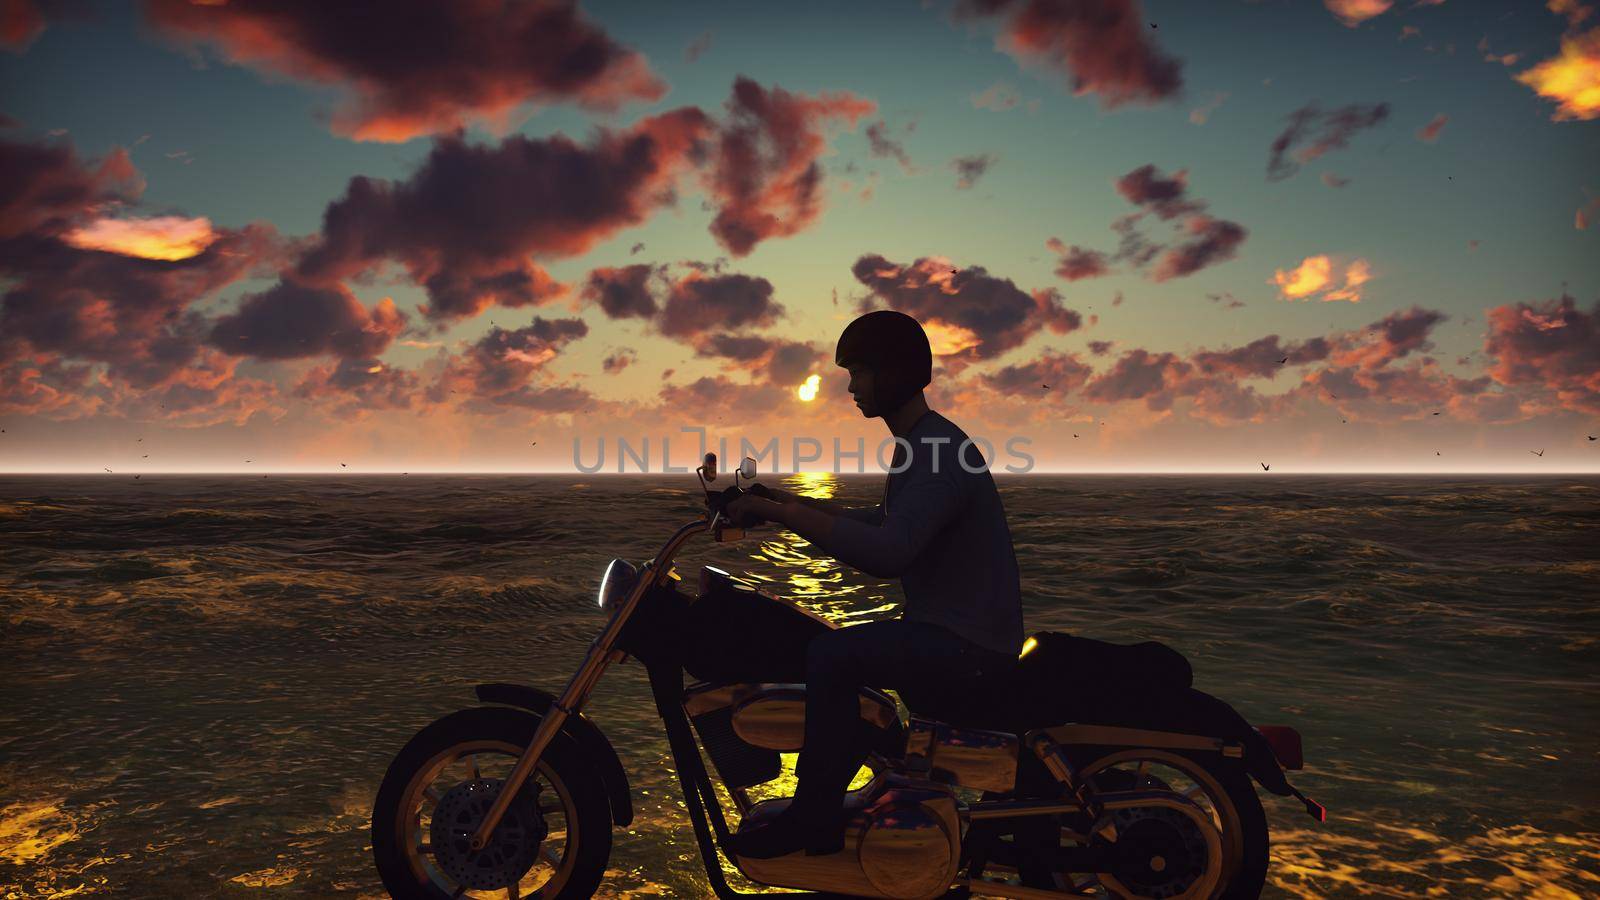  Motorcyclist on a motorbike on the beach against the ocean, the sky, during sunset. Lifestyle Concept.